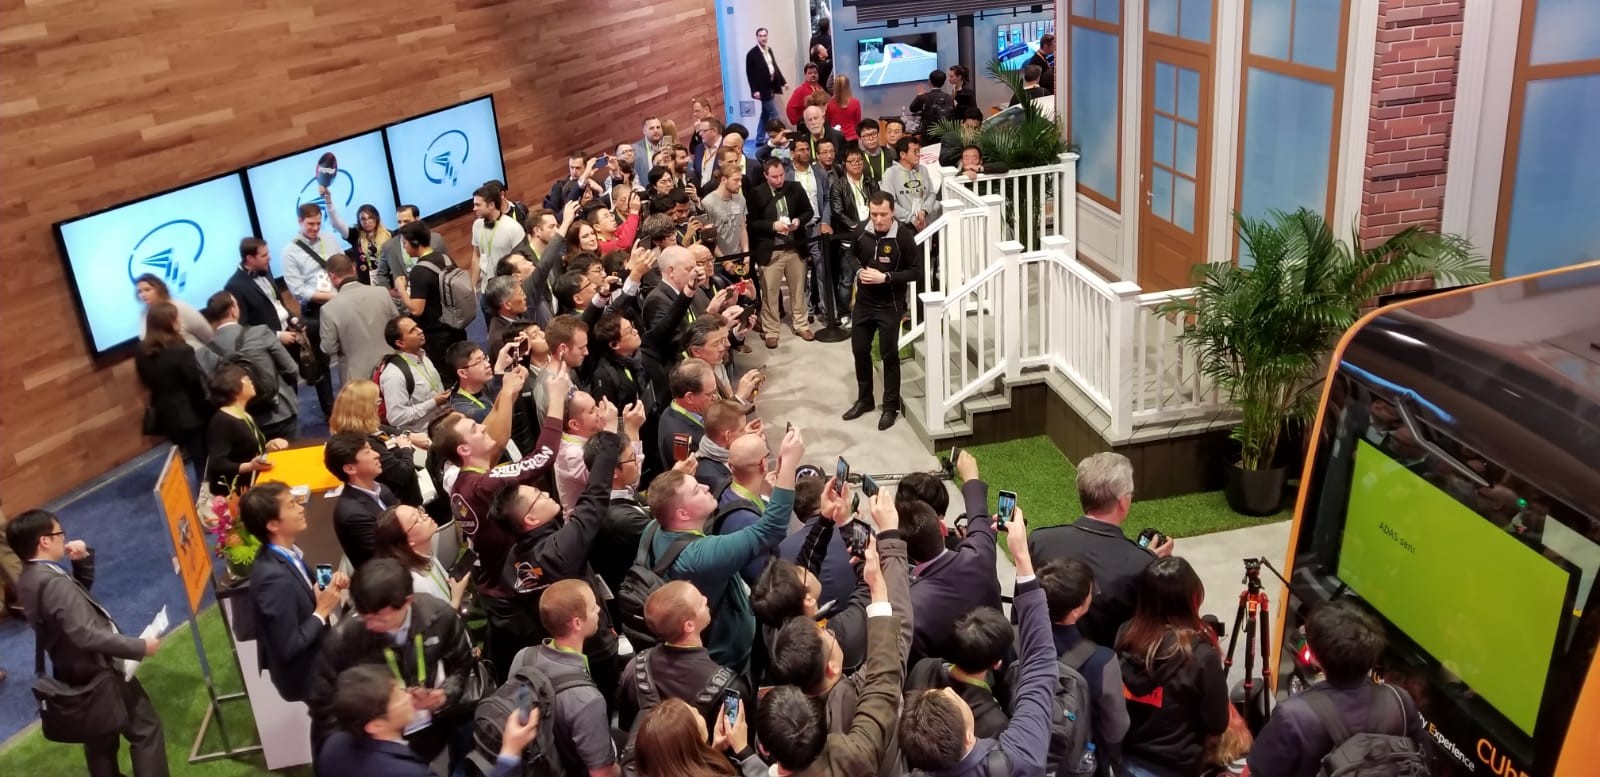 CES 2019 organizers were expecting over 180,000 visitors for this year’s edition. 